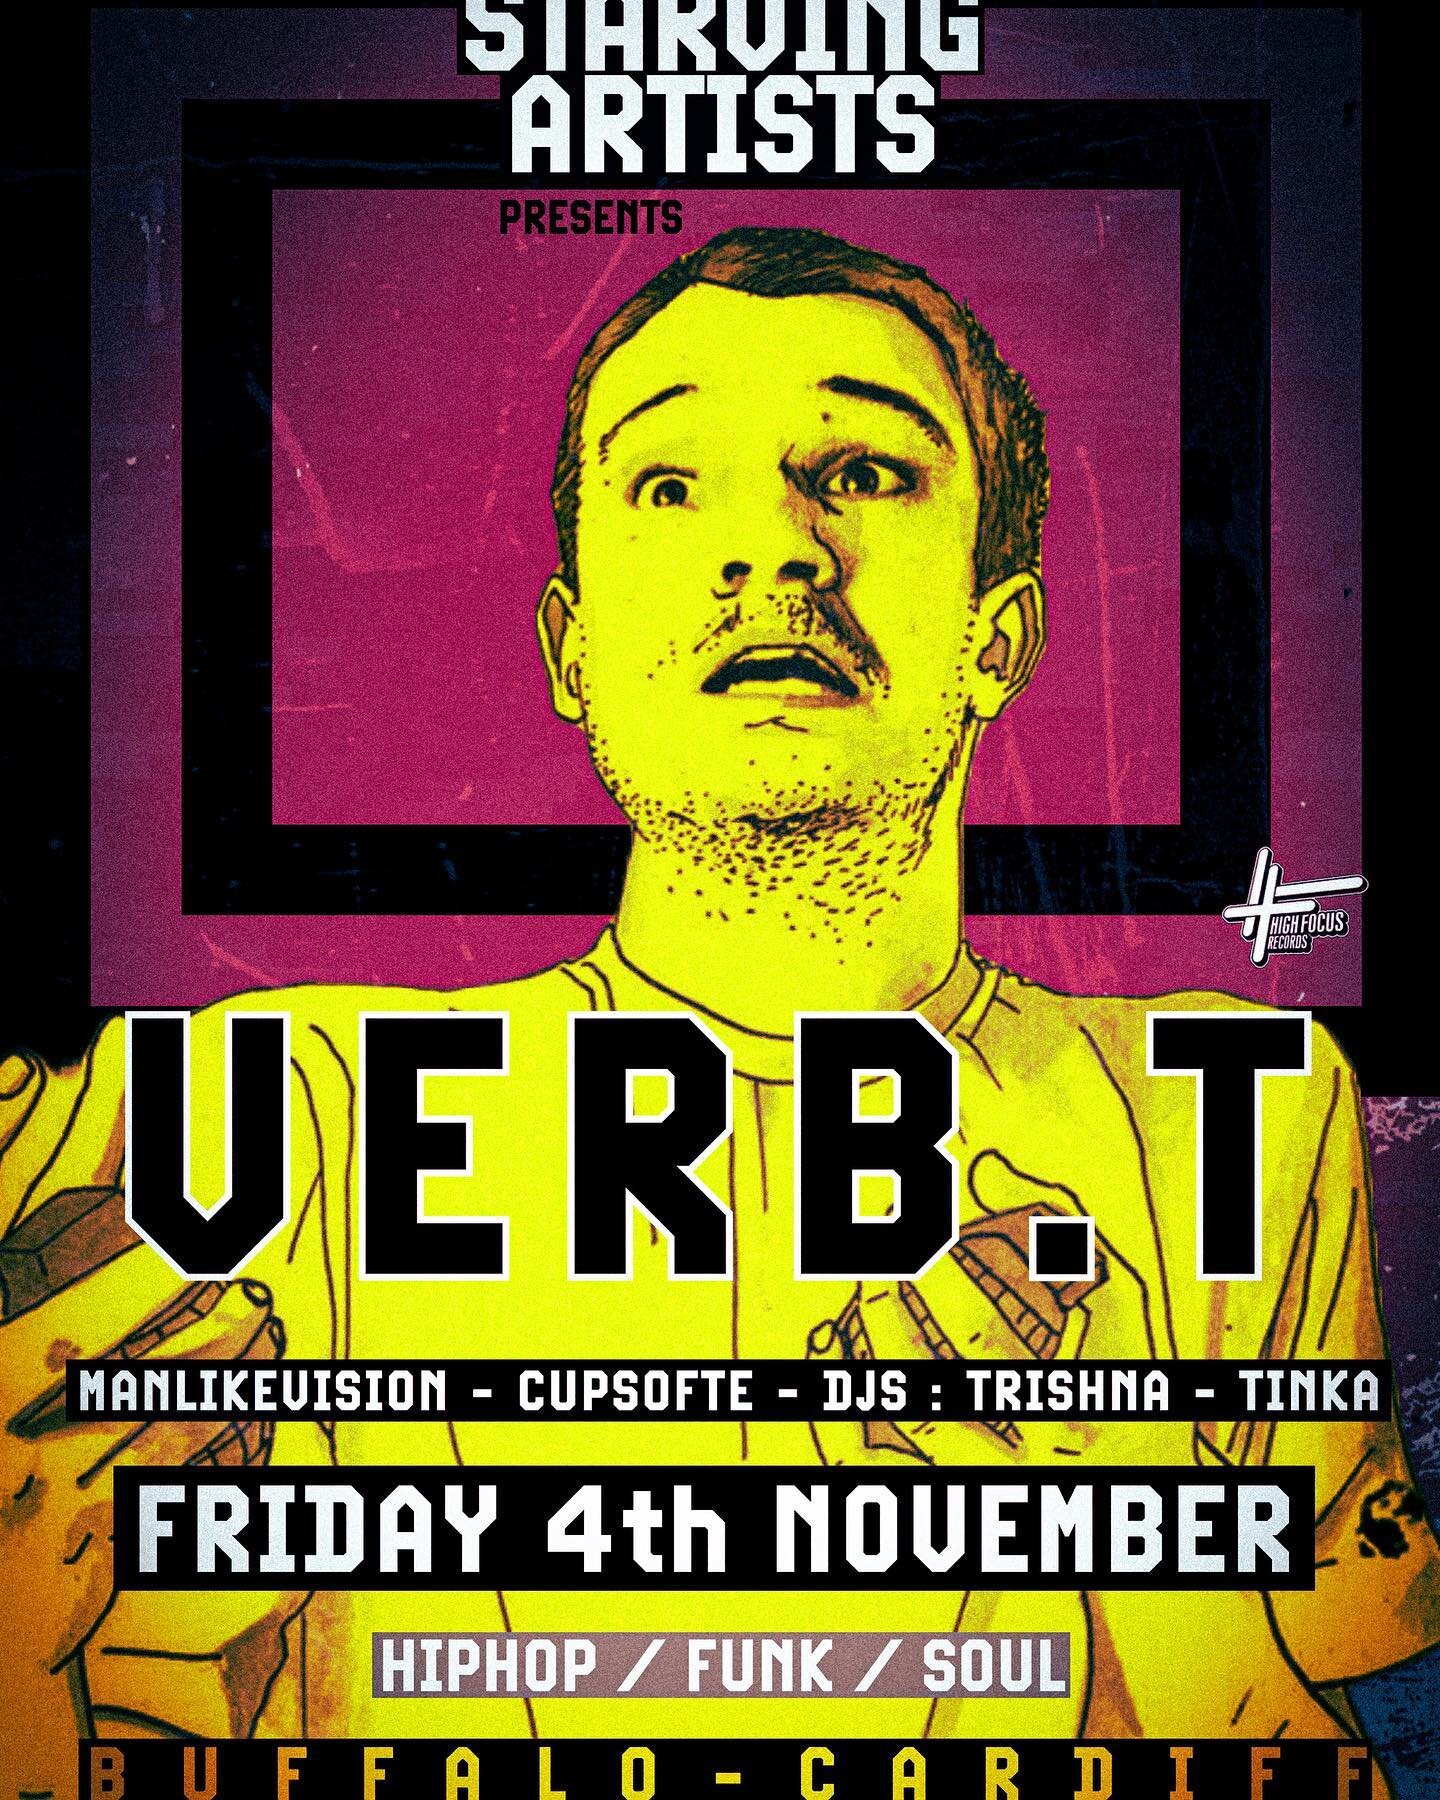 We&rsquo;re so hyped for the return of UK Hiphop don @verb_t to @buffalocardiff Friday 4th Nov 🙌🏾 
Plus some of Wales&rsquo; finest! 🔥
@manlikevision 💥
@cupsofte 💥
@trishnajaikara 💥
@djtinka_ 💥

Tickets in bio or via @skiddleuk
.
.
.
.
.
#hiph